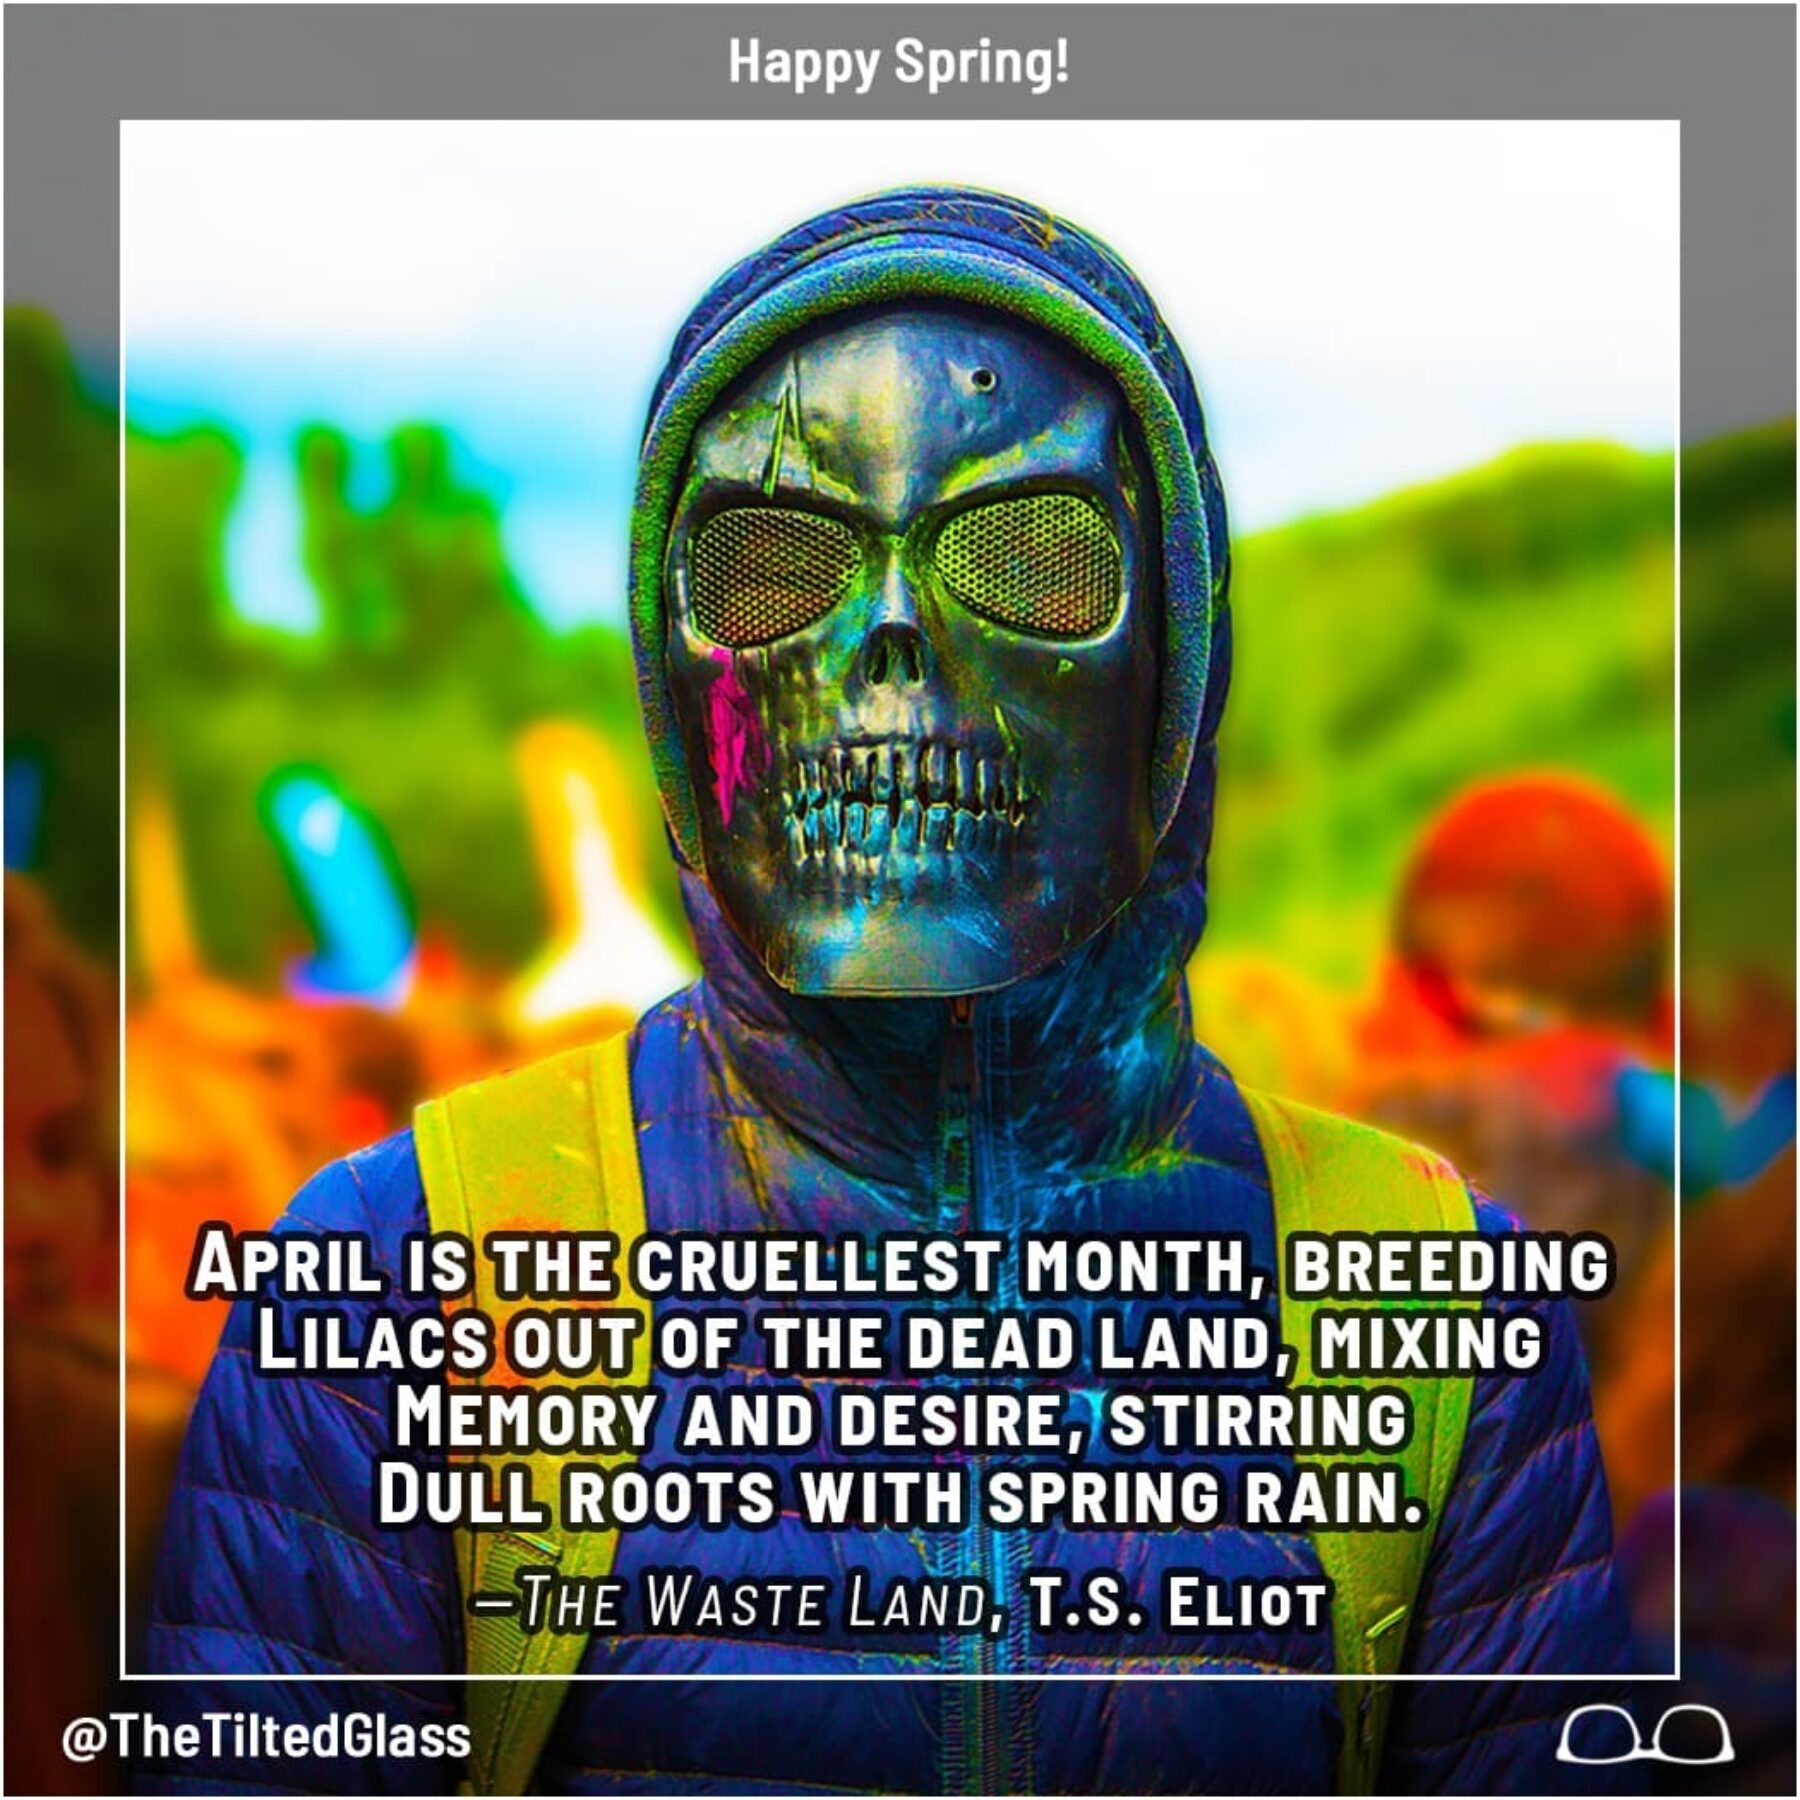 Happy Spring!  The Waste Land by T.S. Eliot